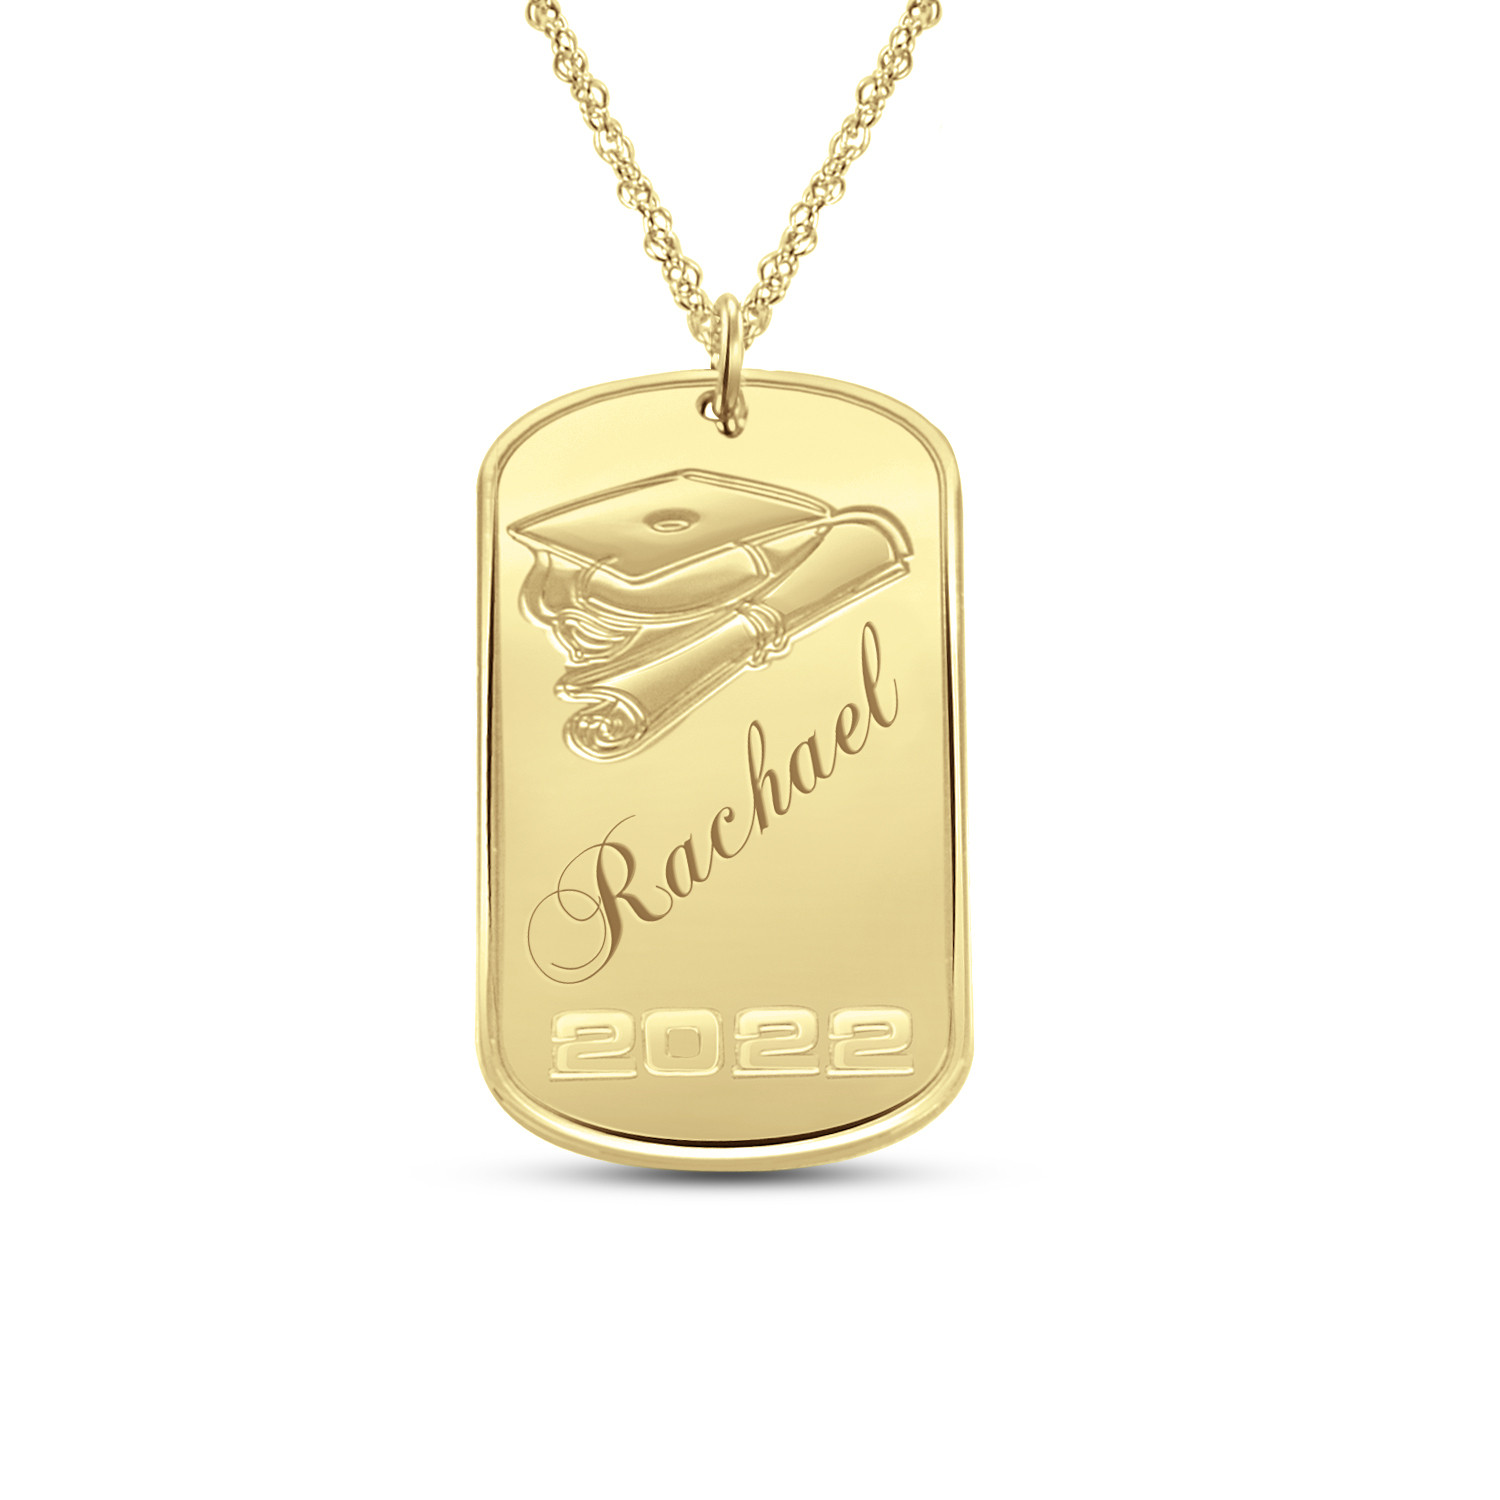 42mm x 22m DogTag Pers Pendant